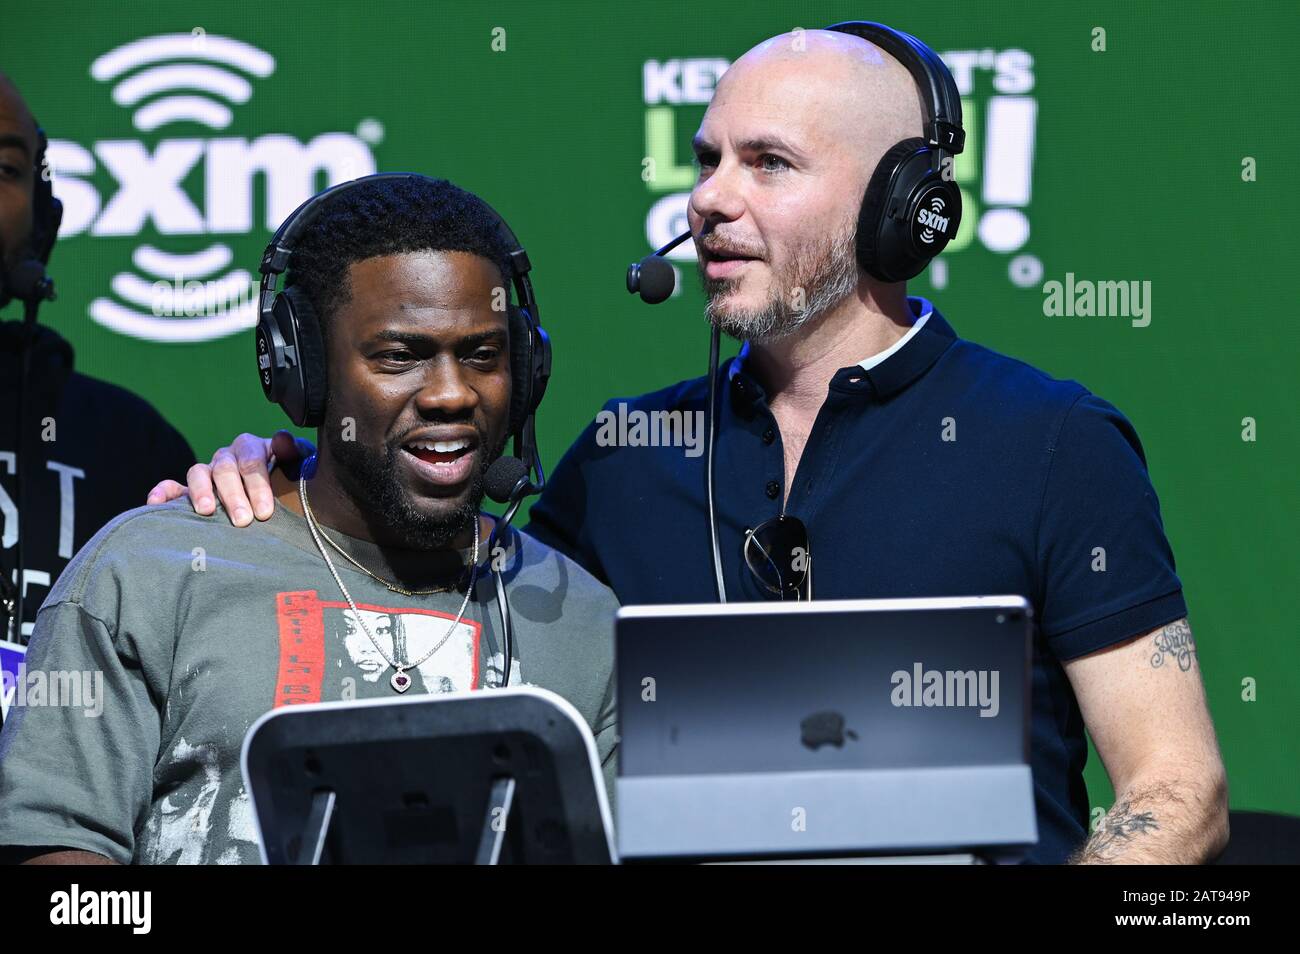 Miami, USA. 31st Jan, 2020. Kevin Hart and Pitt Bull record the radio show Laugh Out Loud Radio at SiriusXM on radio row for Super Bowl LIV held at the Miami Beach Convention Center in Miami, Florida on Jan. 31, 2020. (Photo by Anthony Behar/Sipa USA) Credit: Sipa USA/Alamy Live News Stock Photo